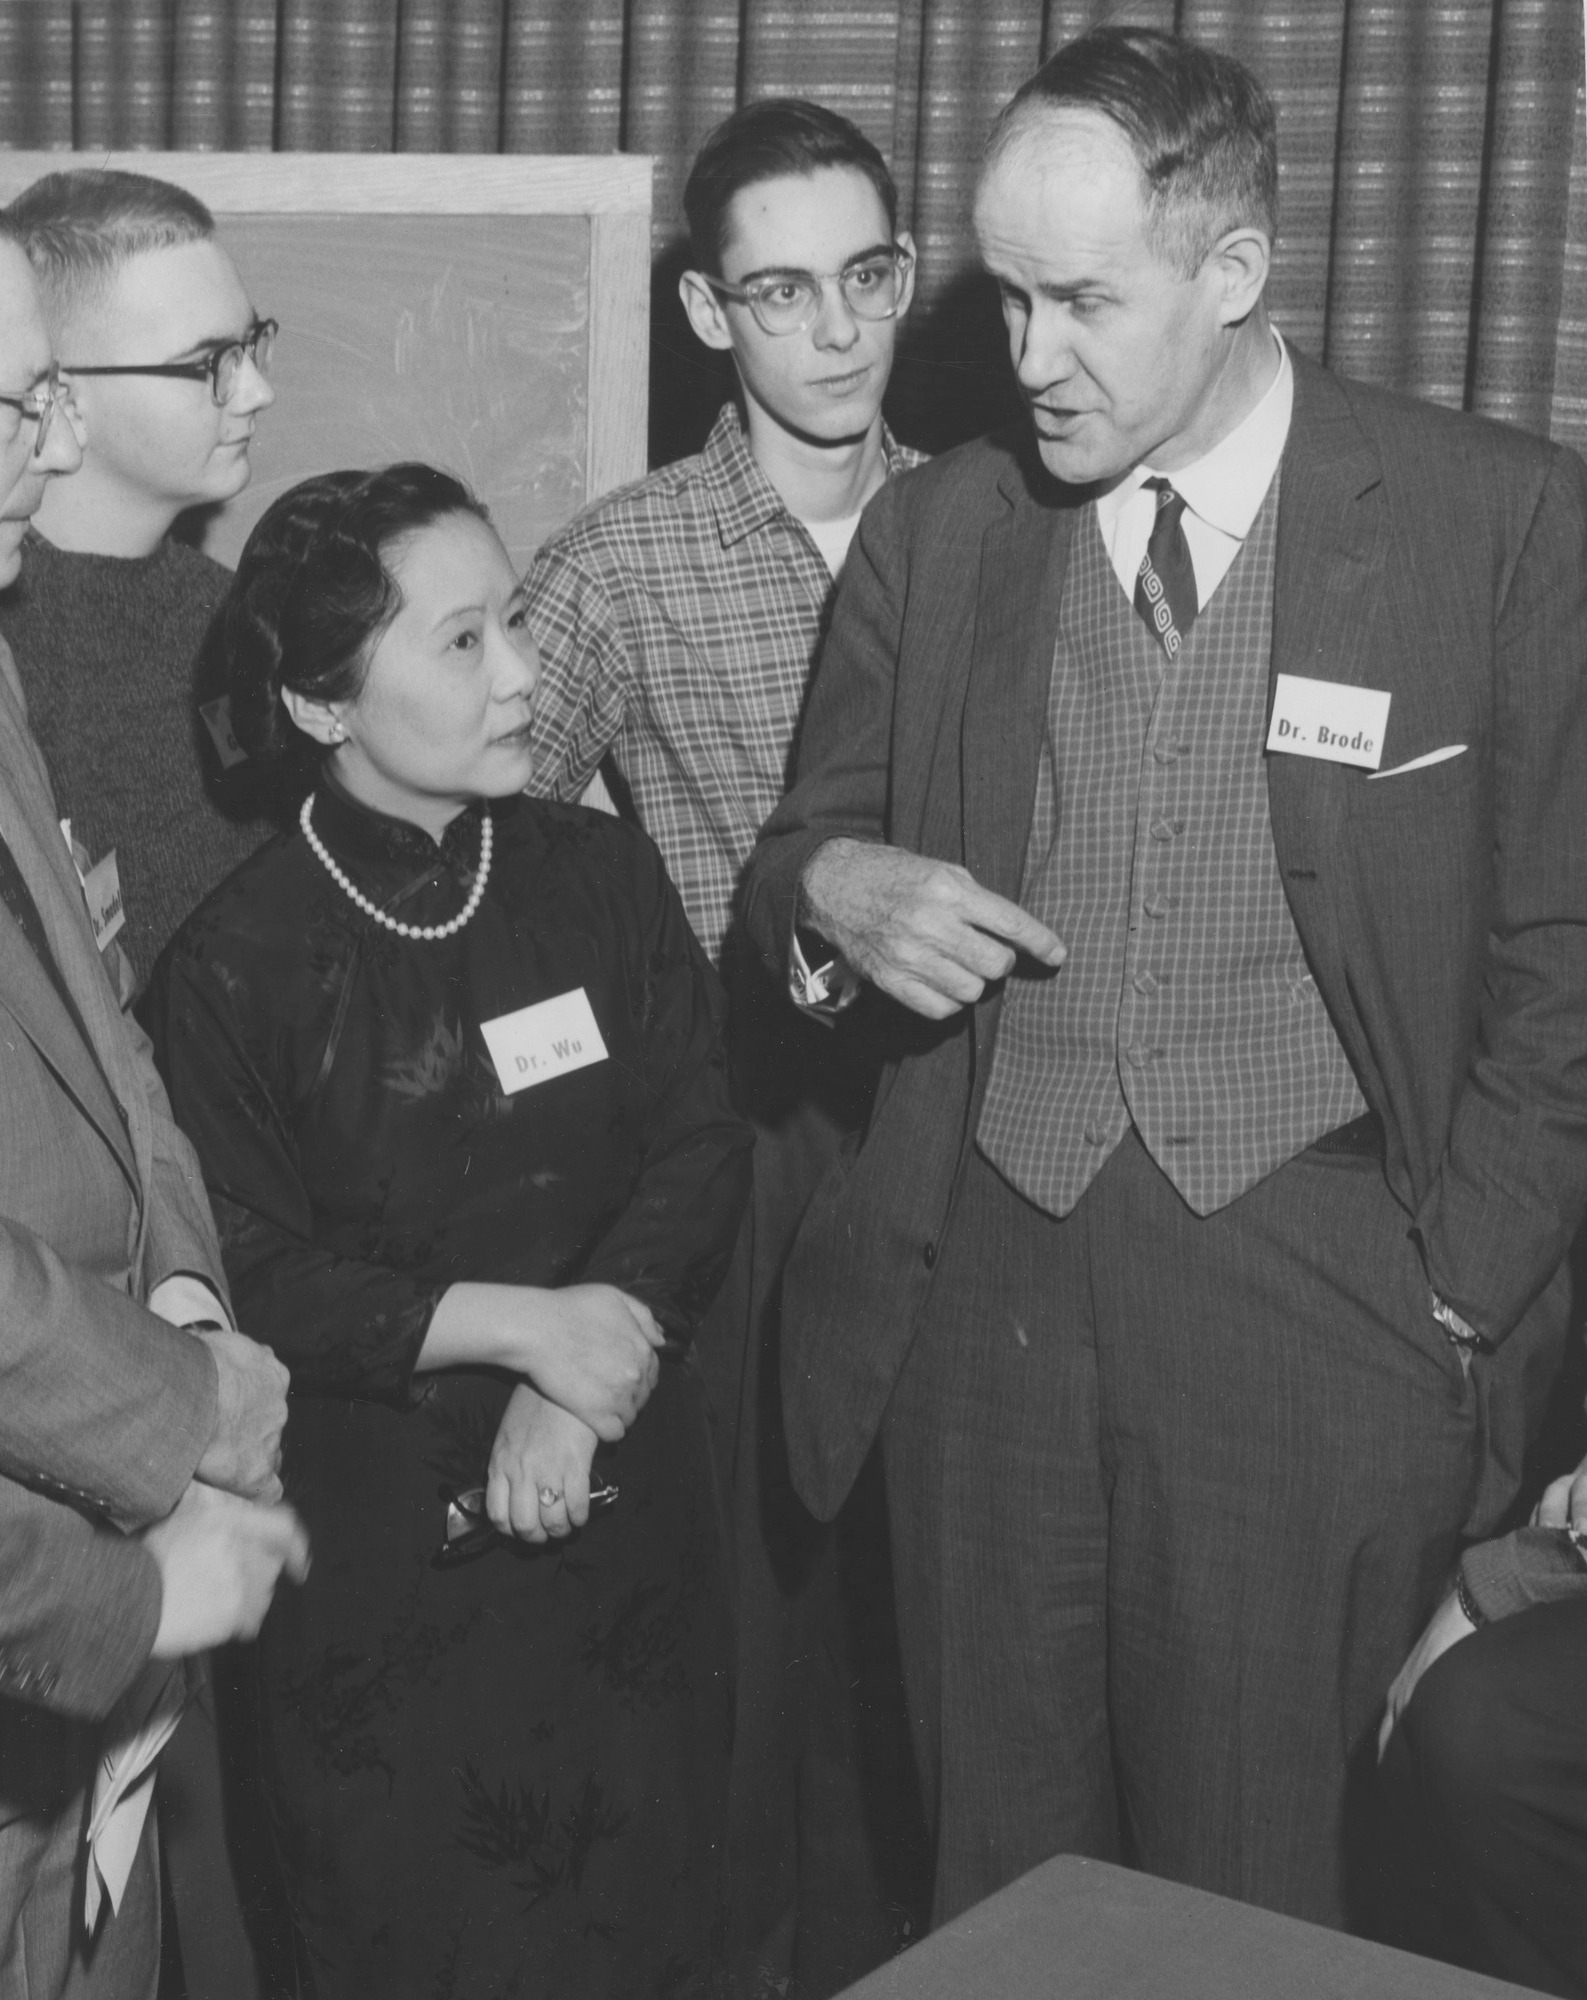 Professors Wu Chien-Shiung and Wallace Brode with Science Talent Search winners, Columbia University, New York, New York, United States, 15 Mar 1958, photo 2 of 2